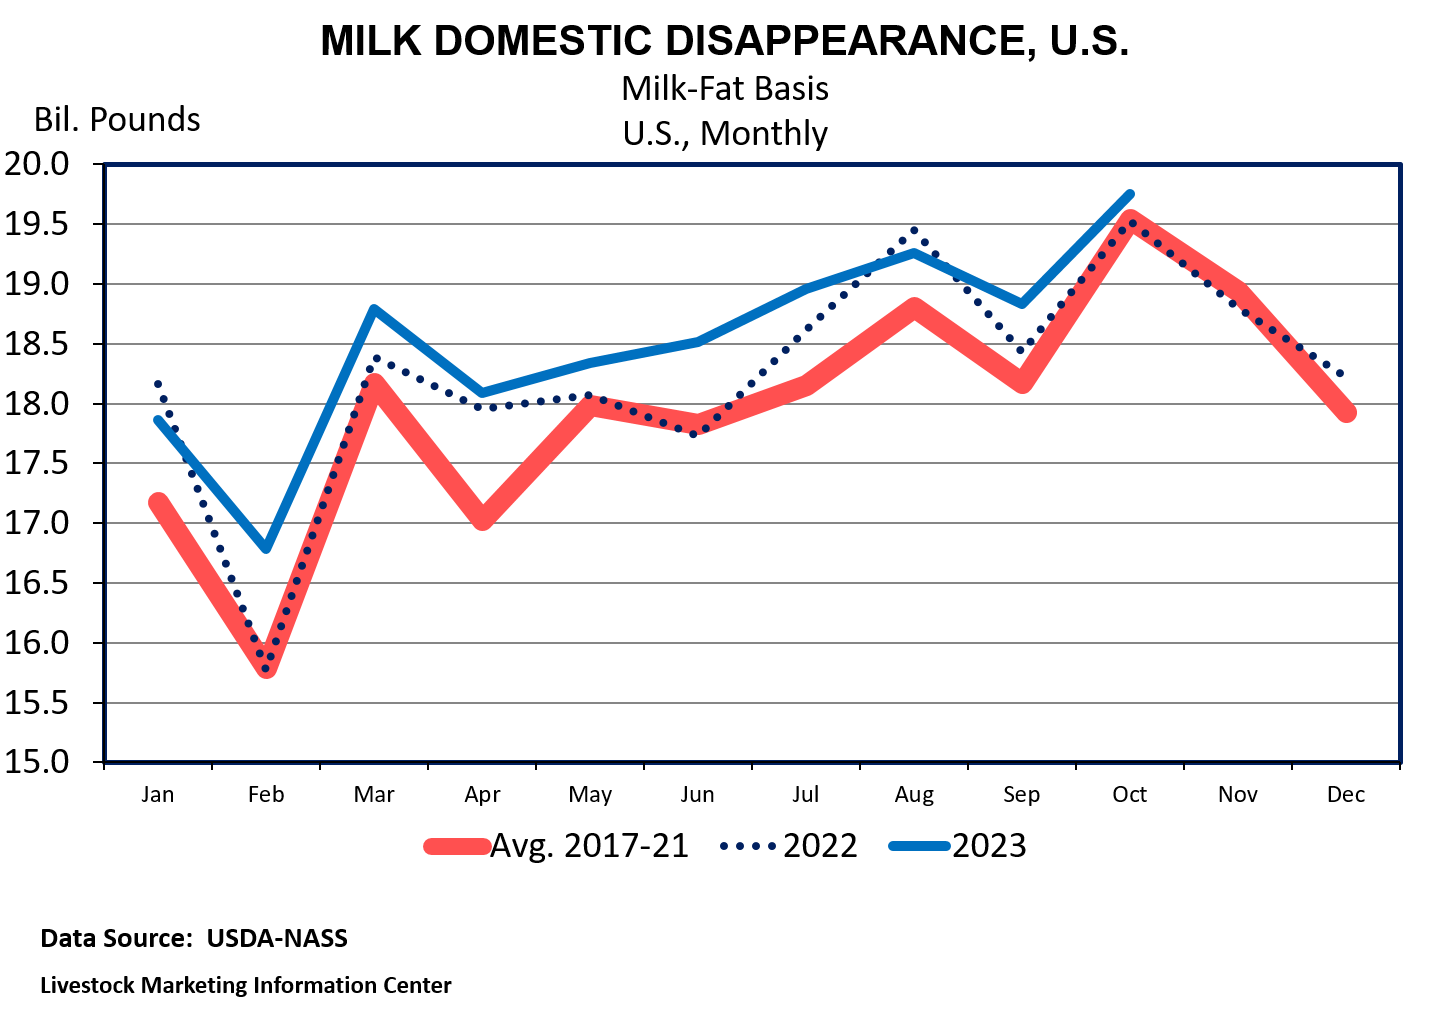 Monthly domestic milk consumption in the U.S. in 2022 and 2023 fluctuated widely with lows during February and highs in October each year.